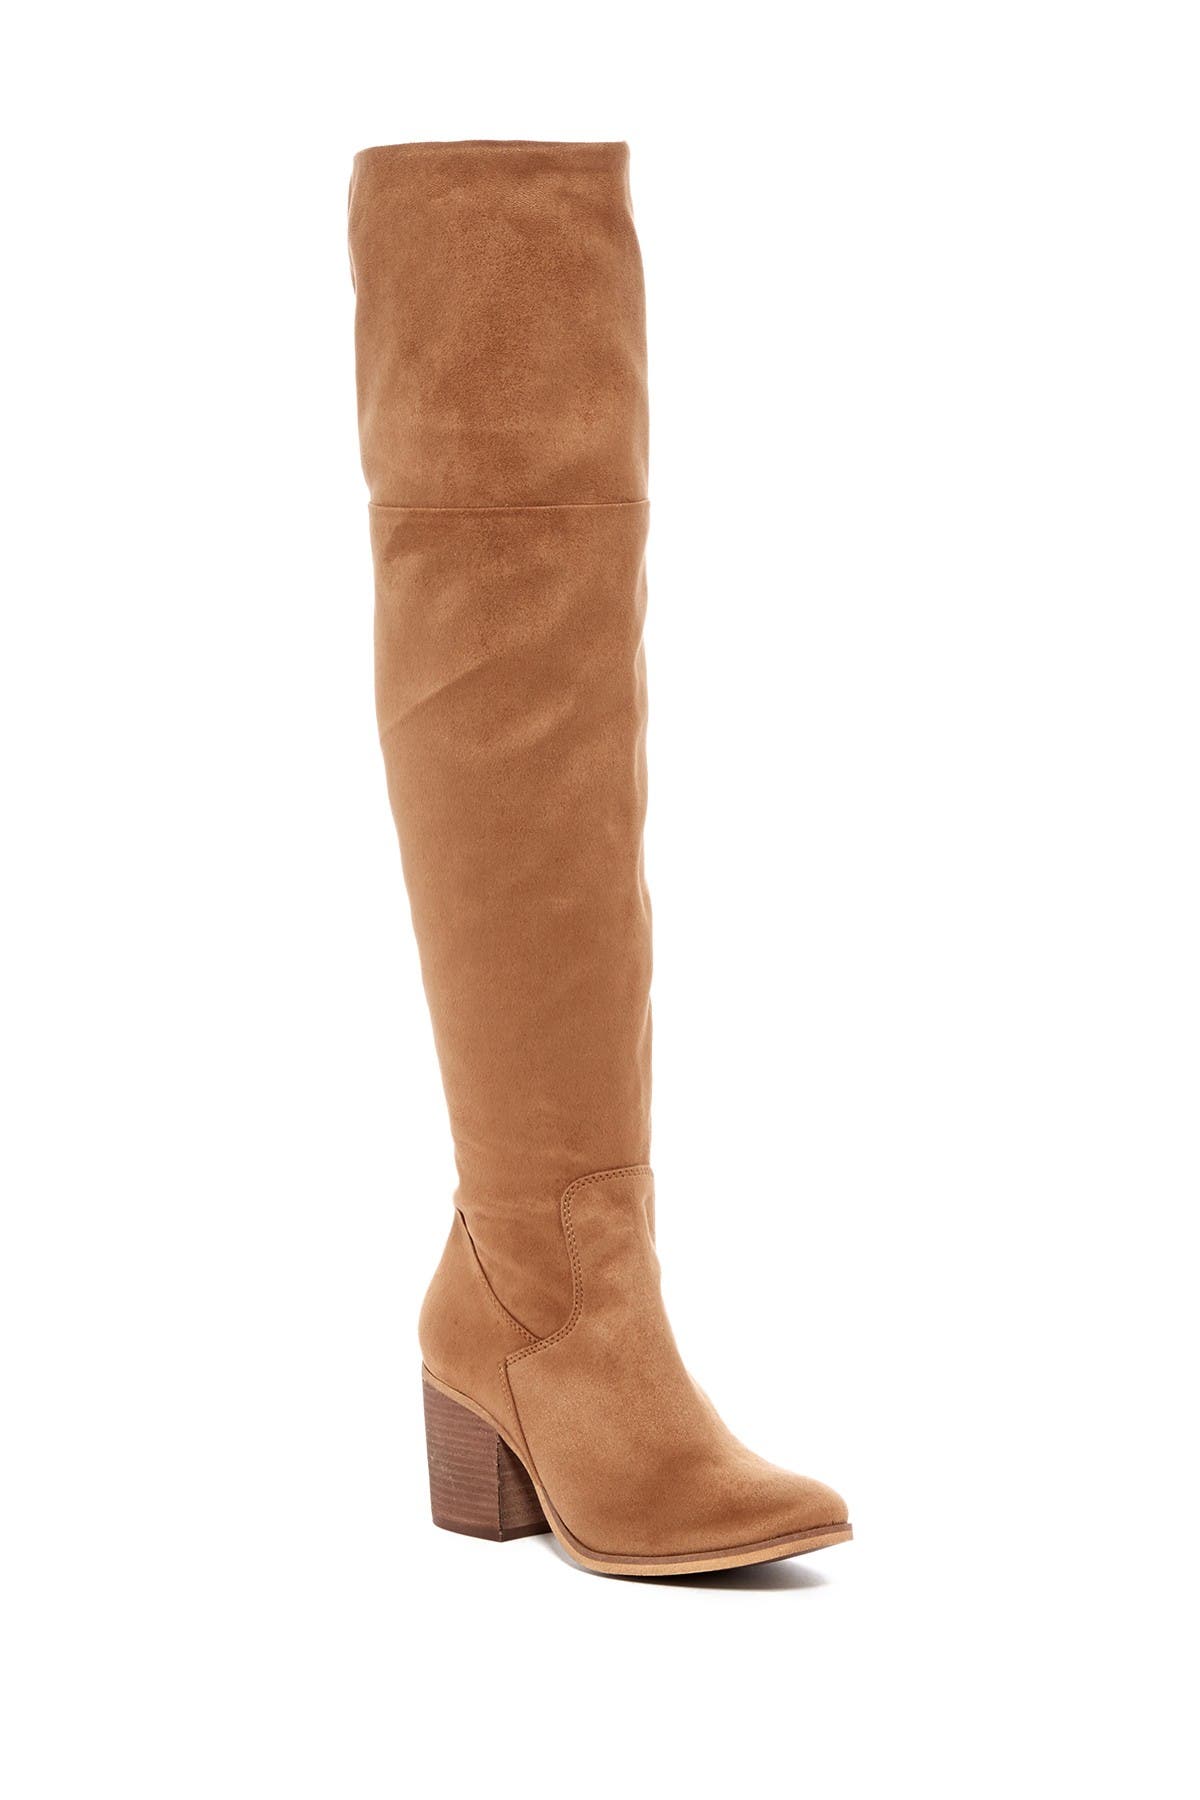 Abound | Stacey Over-the-Knee Boot 